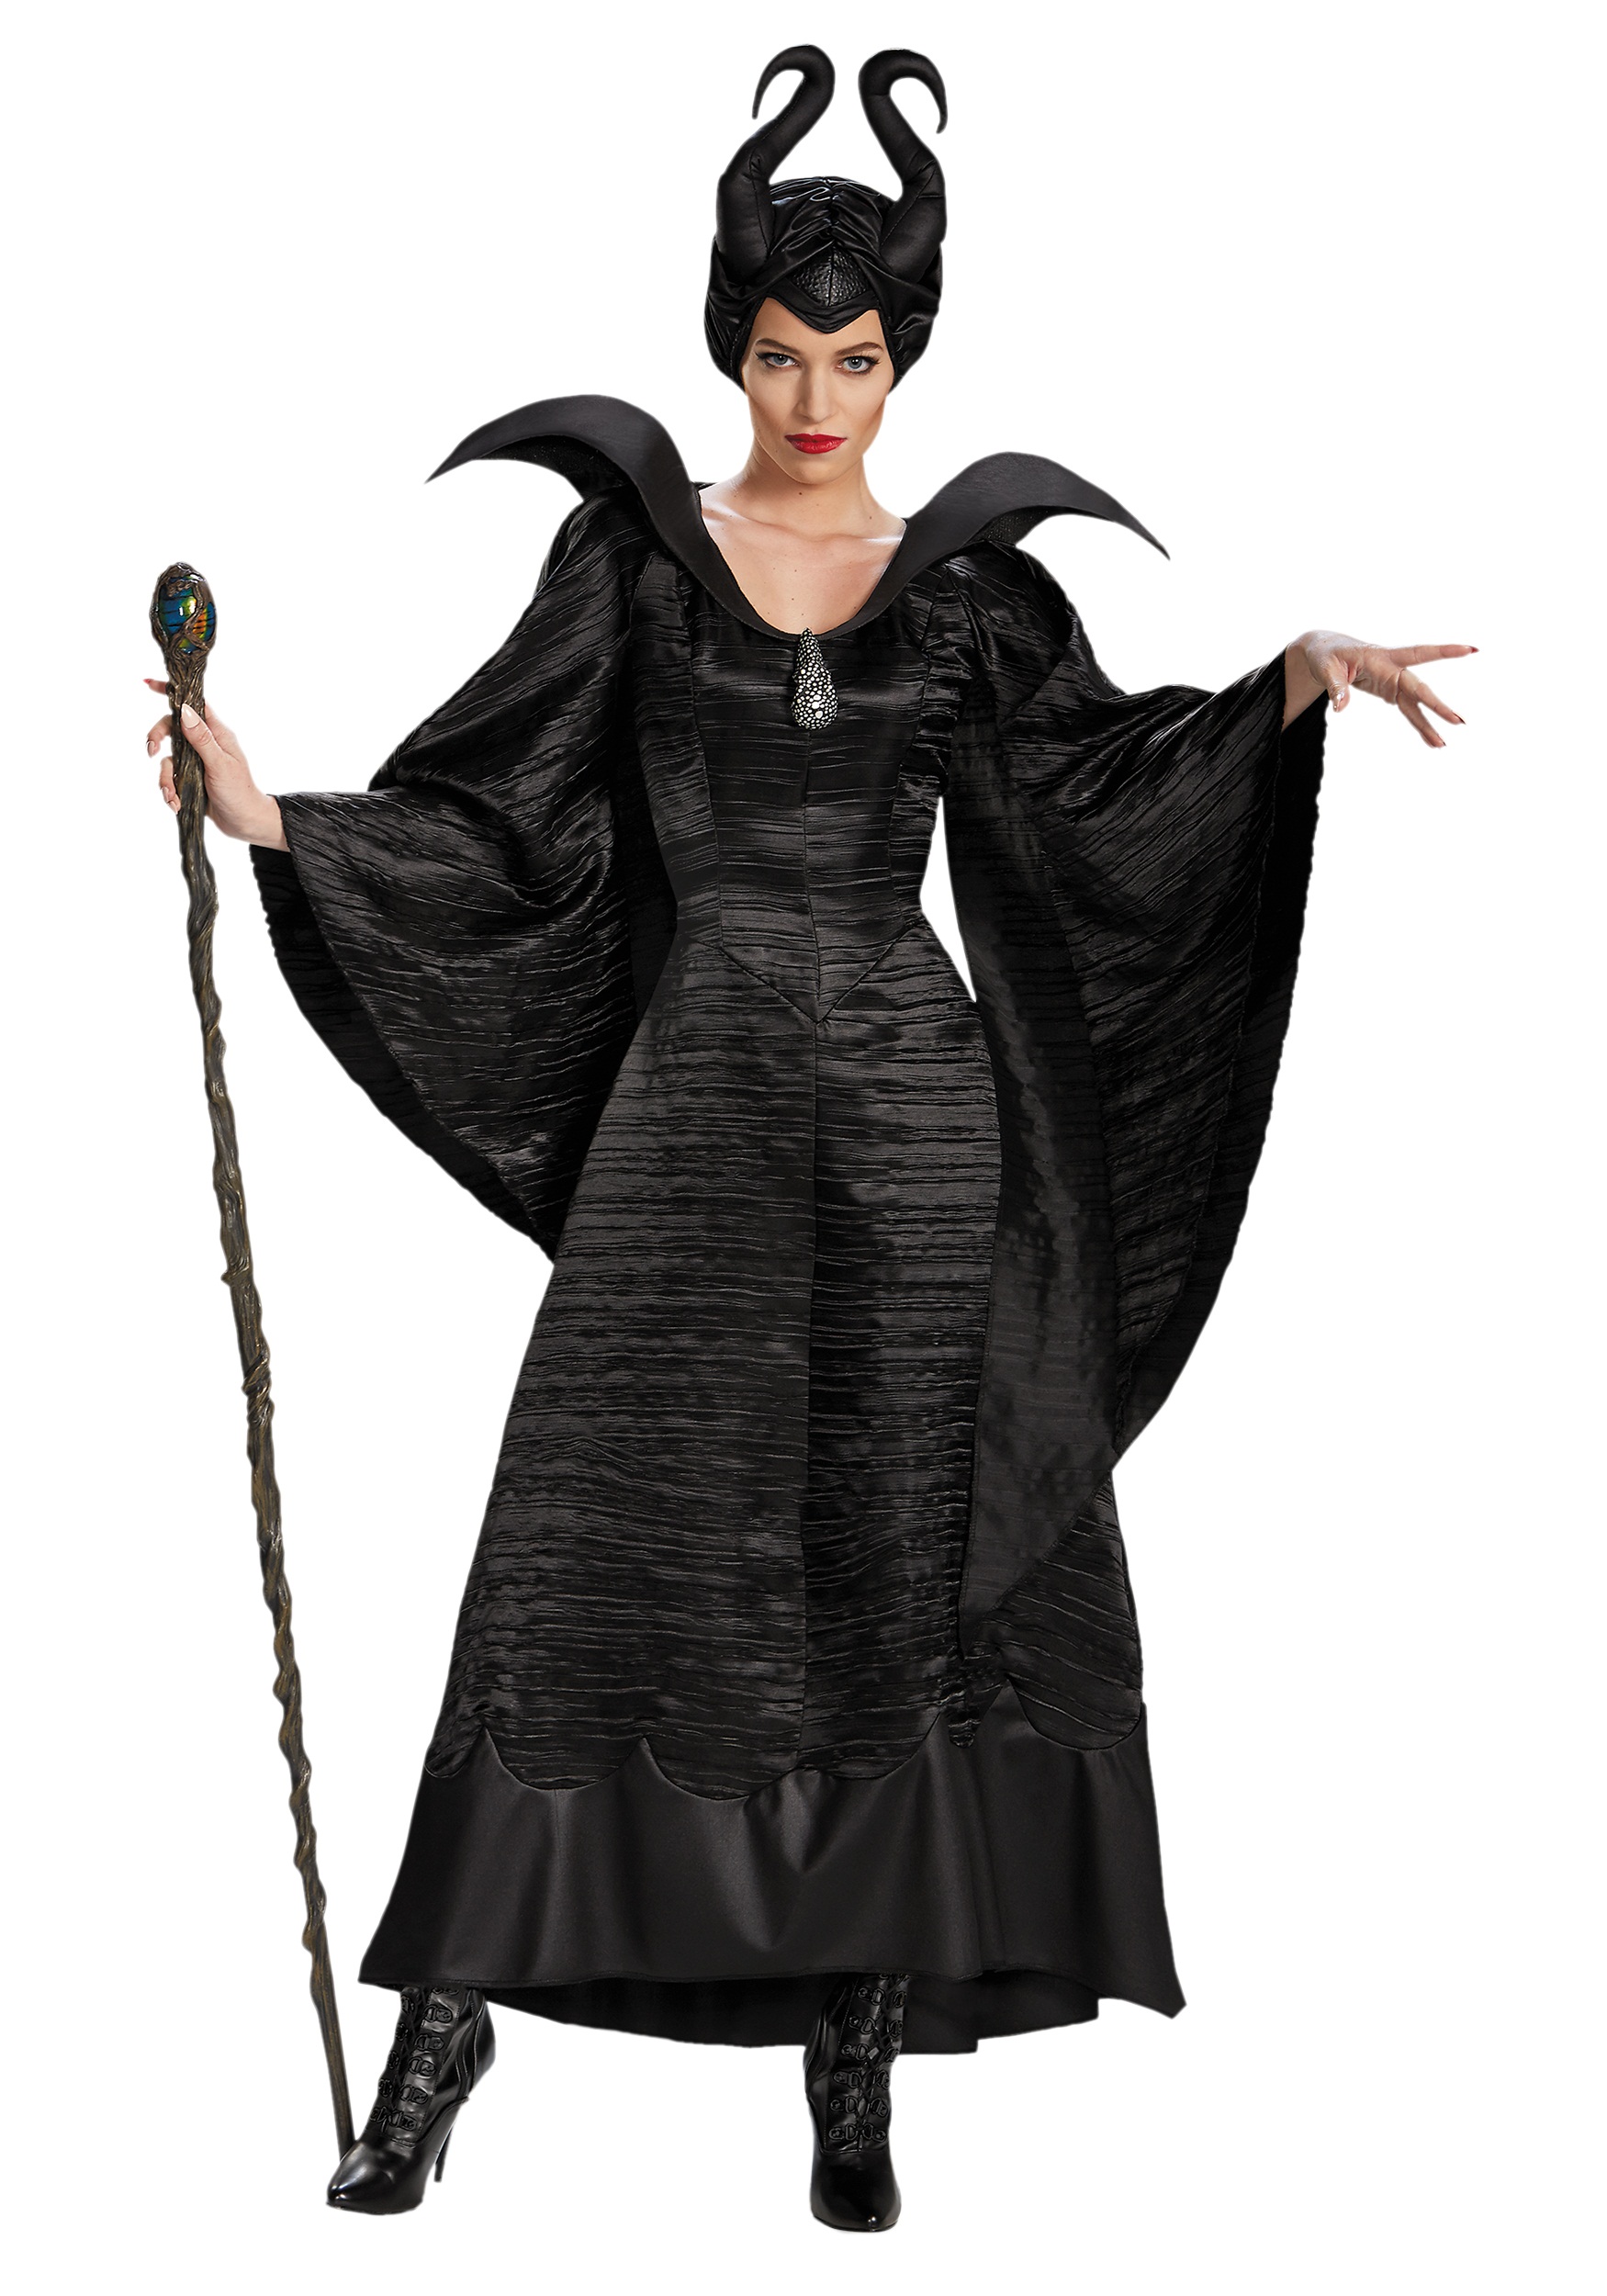 Image of Adult Deluxe Maleficent Christening Black Gown Costume ID DI71825-M